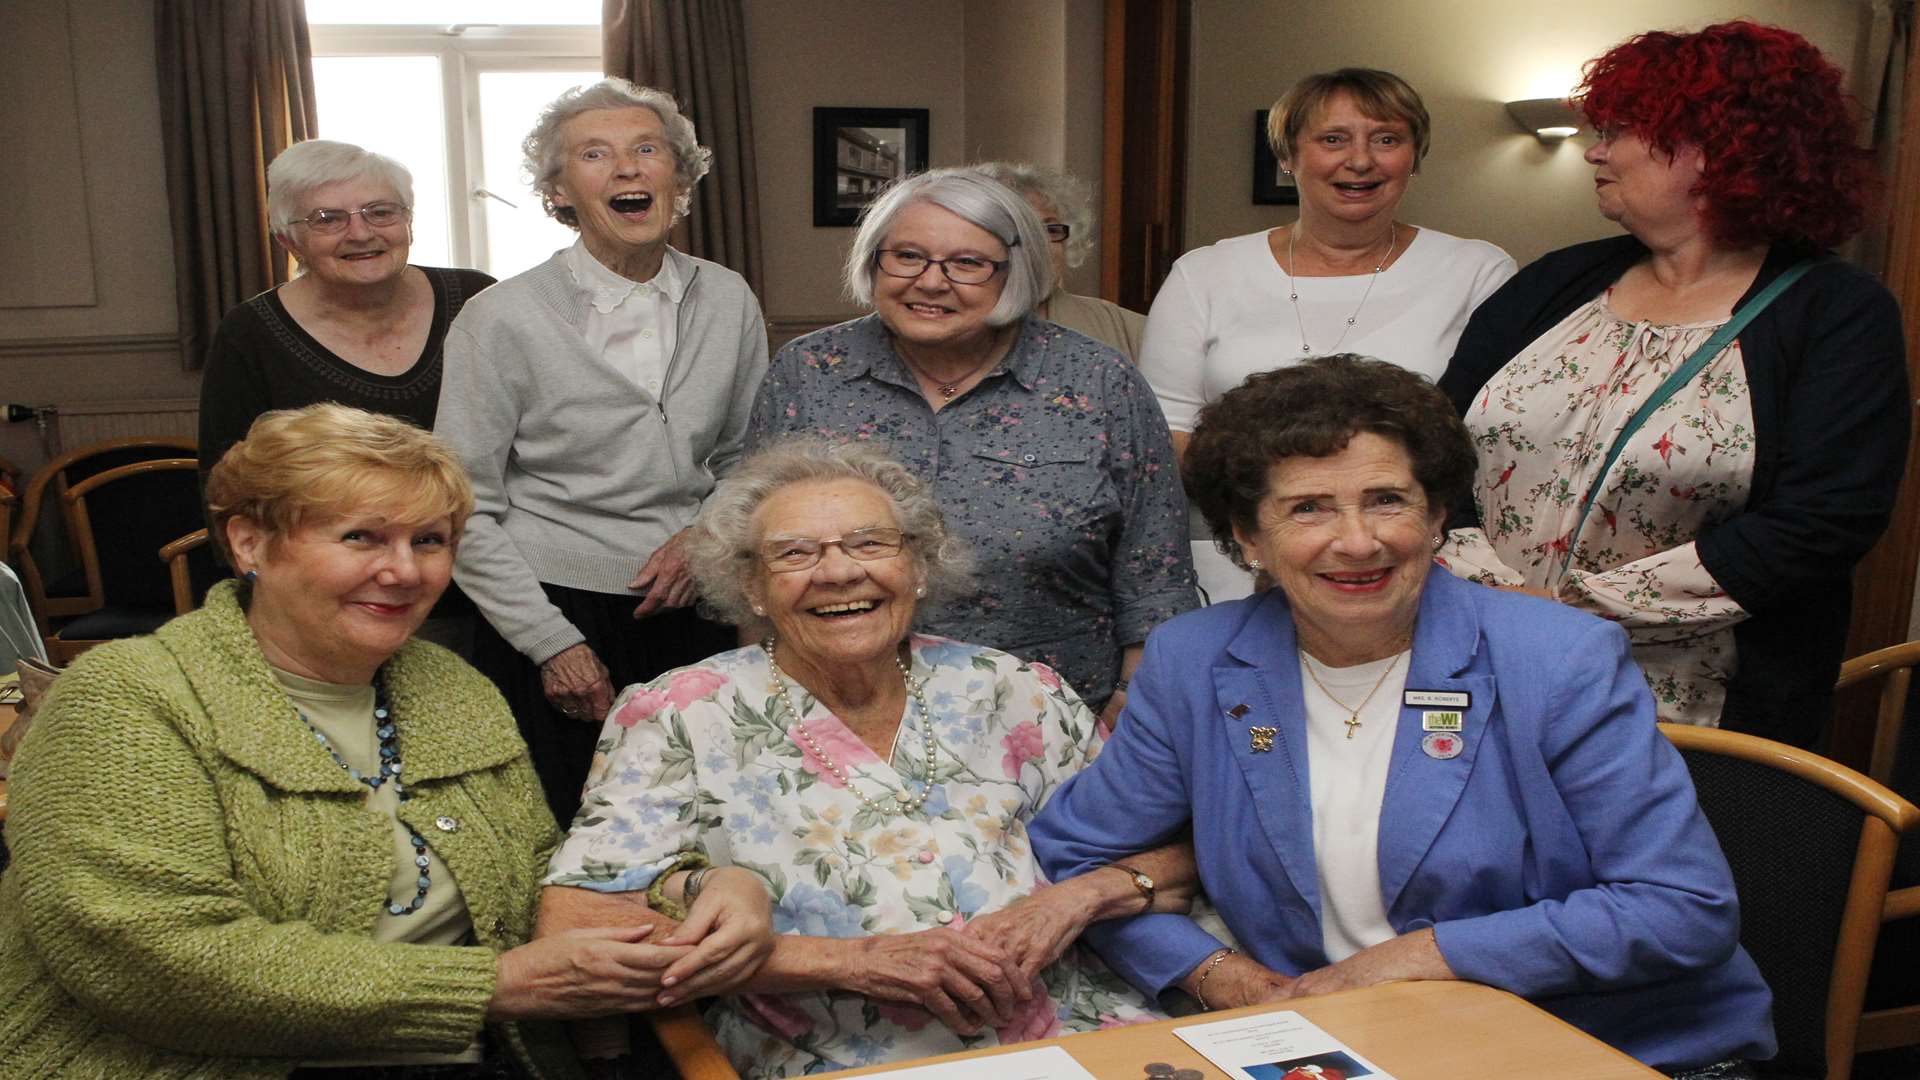 Alice, centre, with some of the other ladies from the WI, and Brenda Roberts, right, Ex- President of the WI and long-life best friend.